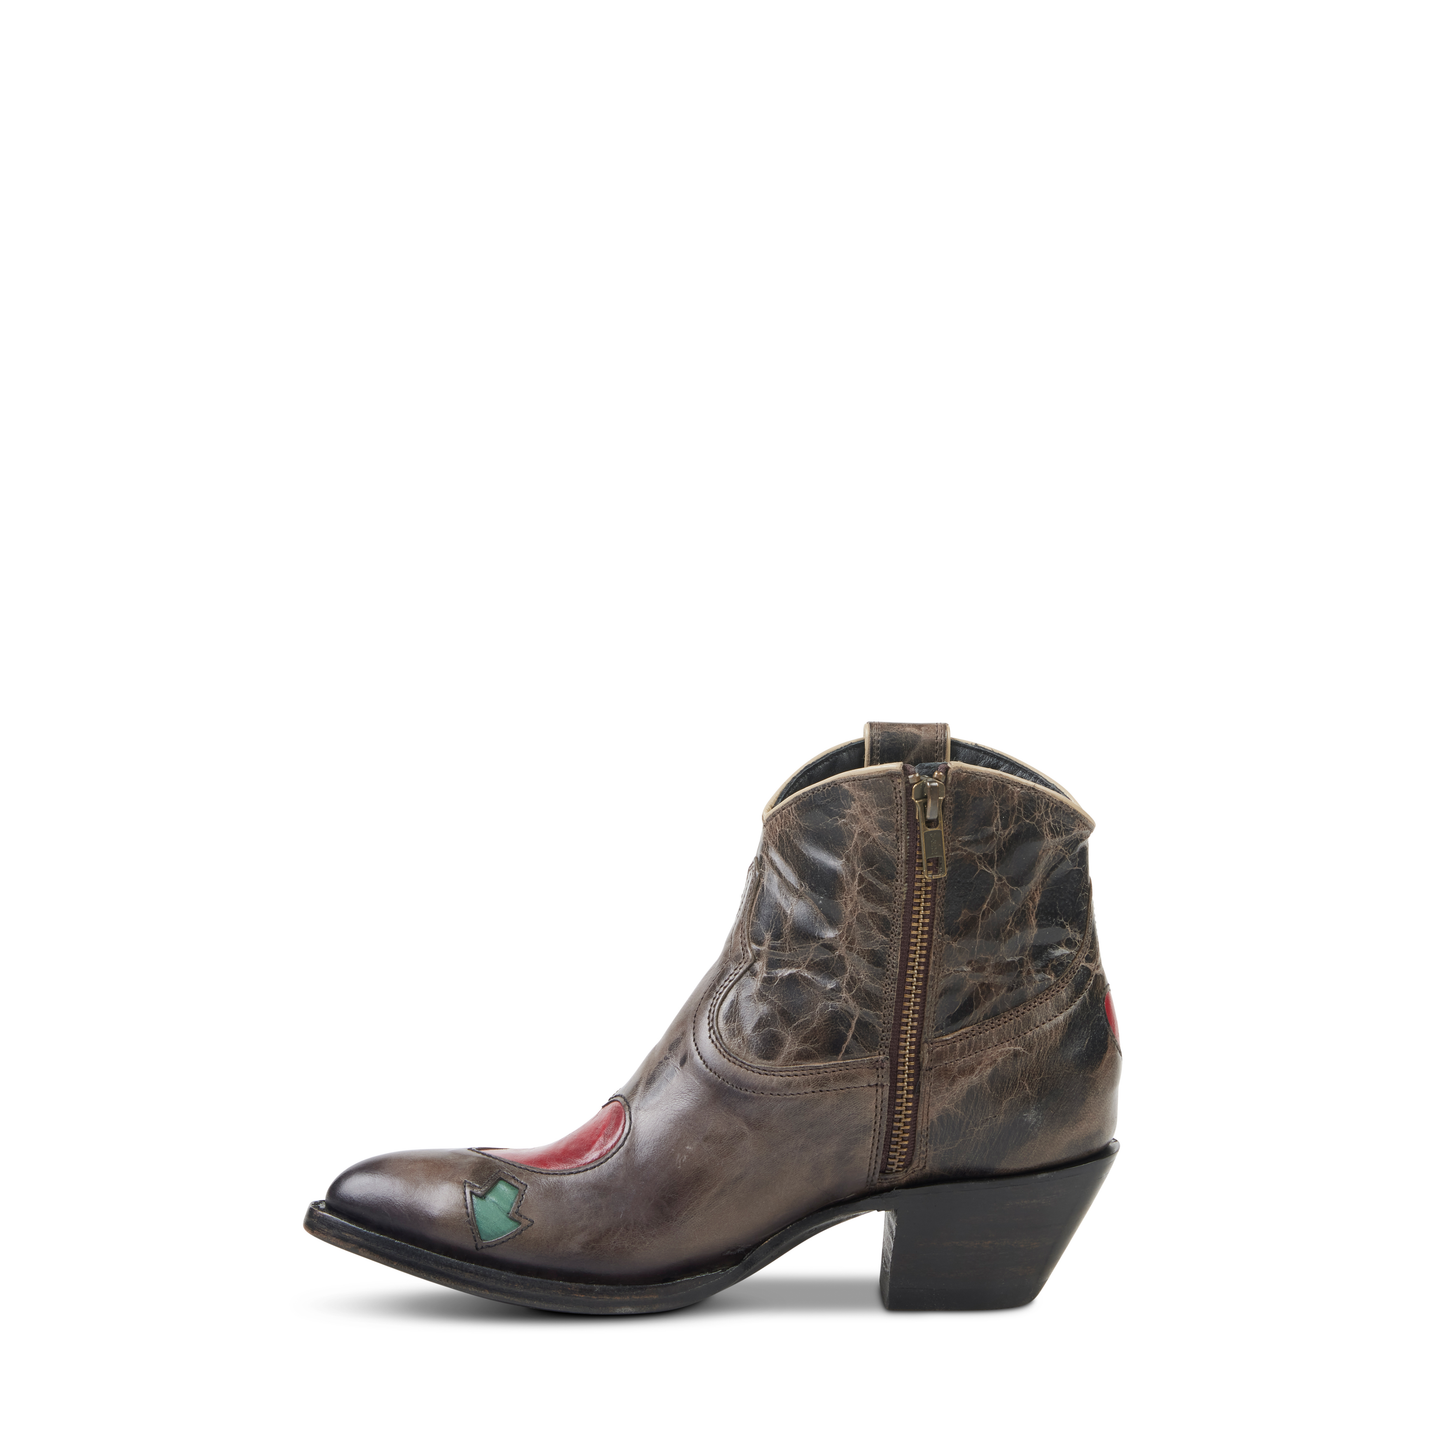 Allens Brand - Sweetheart - Almond Toe - Anthracite